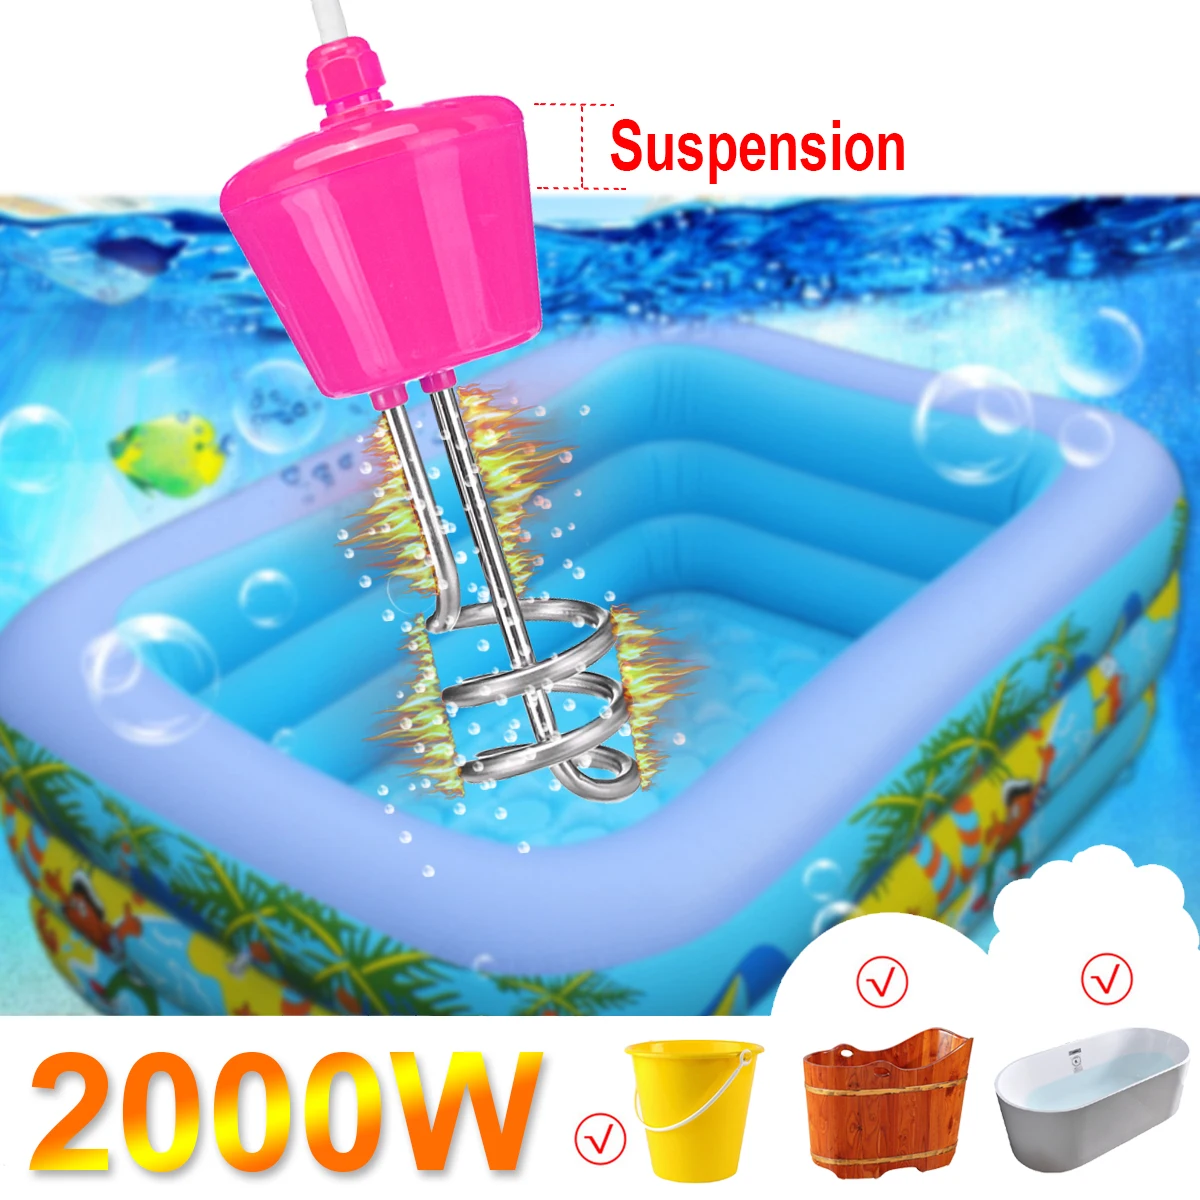 

2000W 220-250V Portable Suspension Stainless Steel Electric Floating Immersion Heater Boiler Water Heating Element For Bathroom